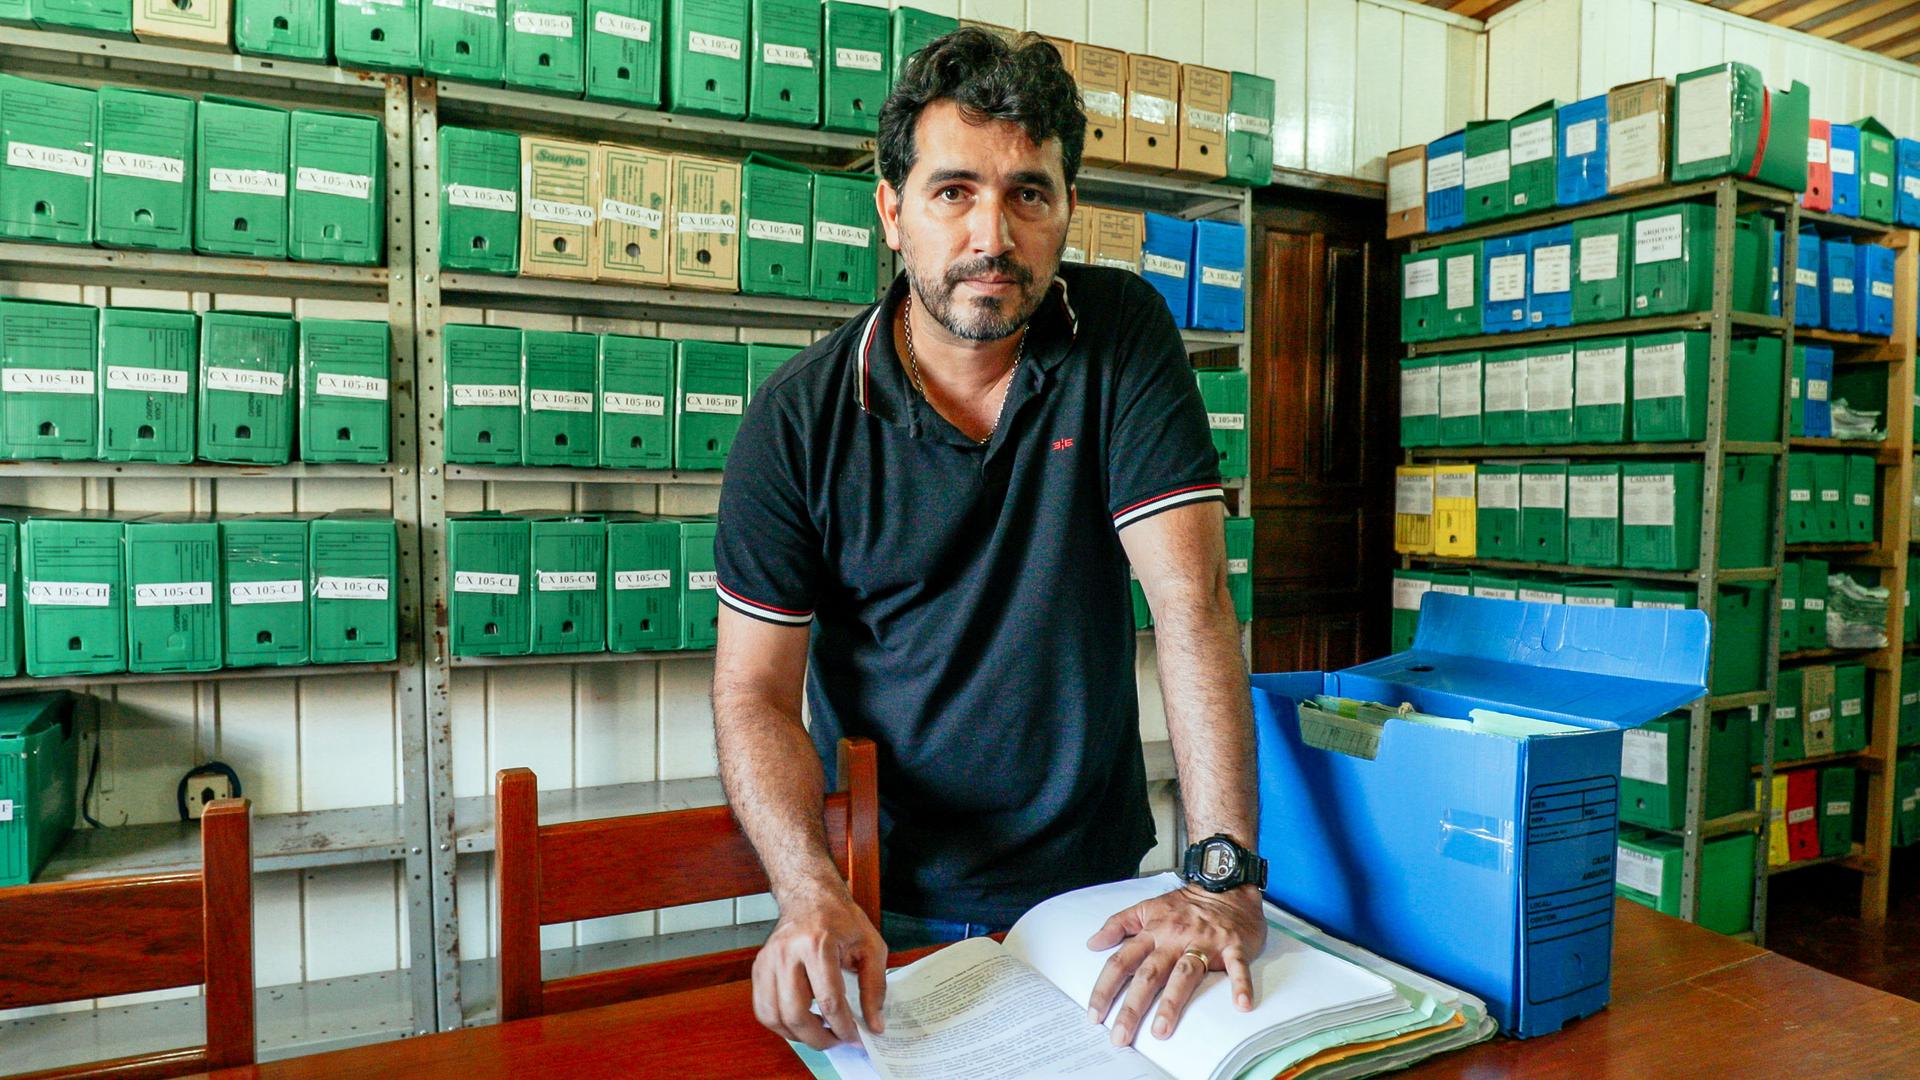 The office of Environmental protection officer Evandro Carlos Selva in Humaitá, Brazil is stuffed with boxes full of fines for illegal logging, most of which, he says, were never paid.